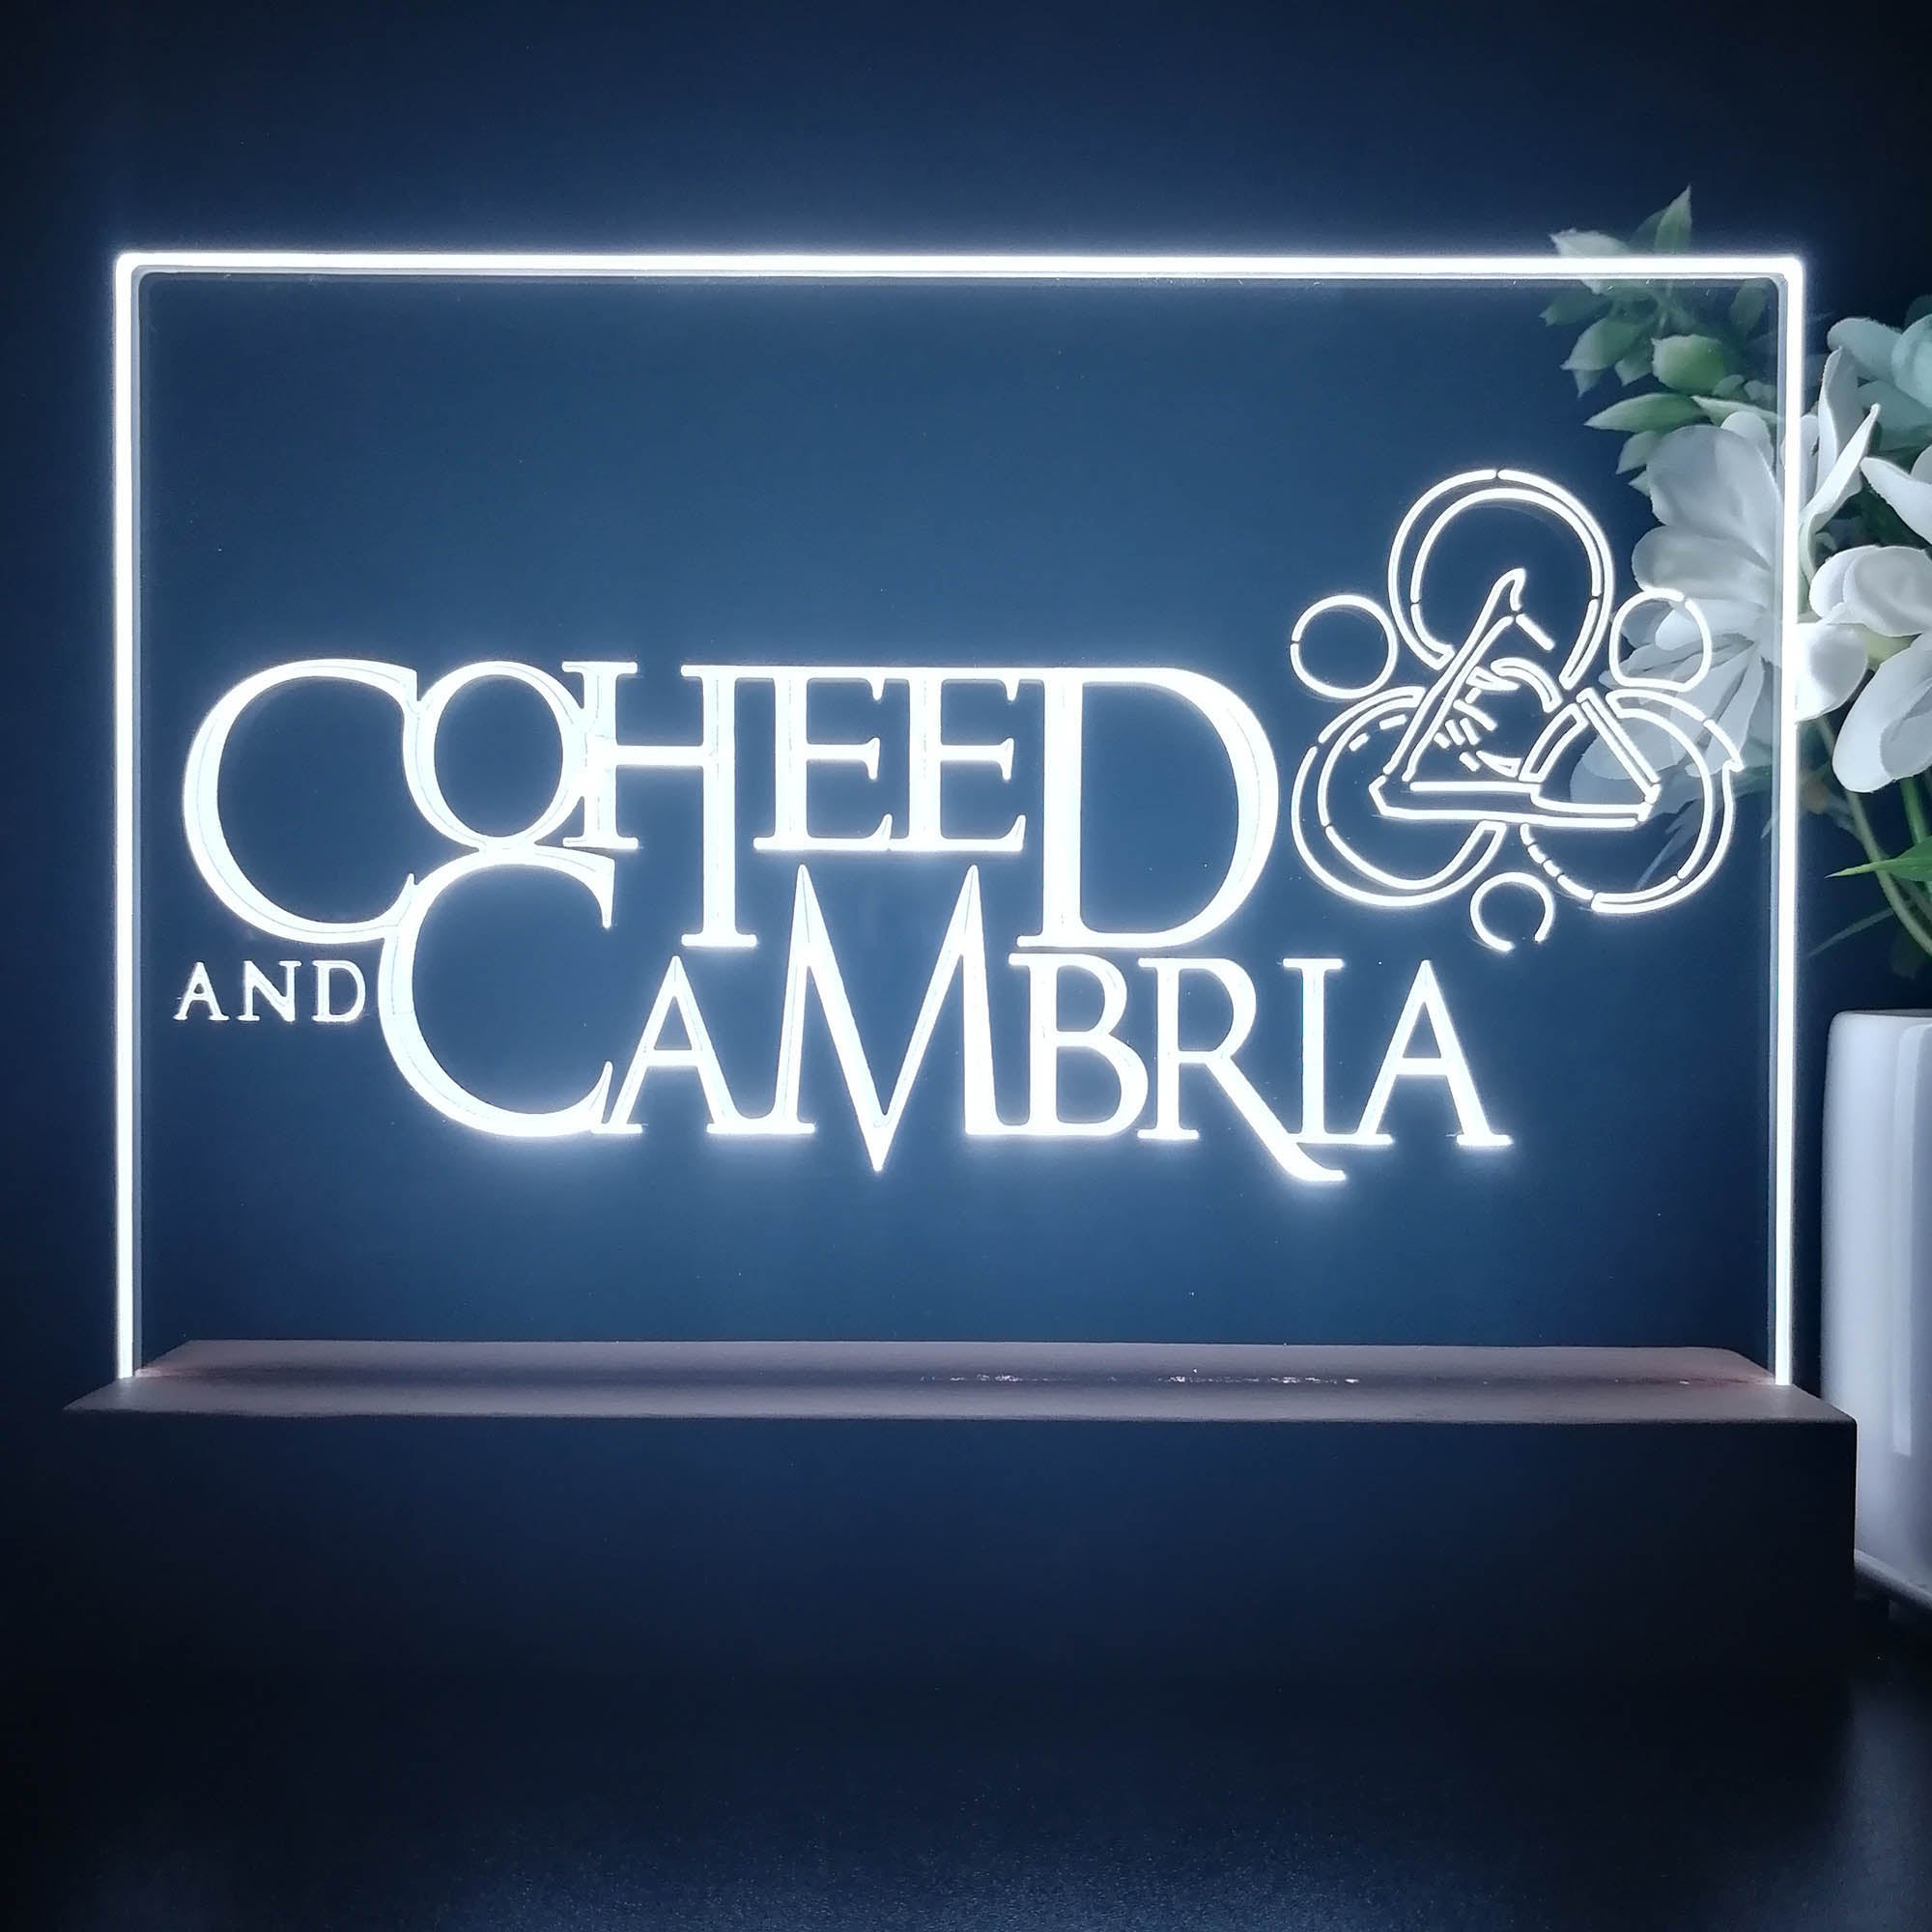 Coheed and Cambria Rock Band 3D Illusion Night Light Desk Lamp